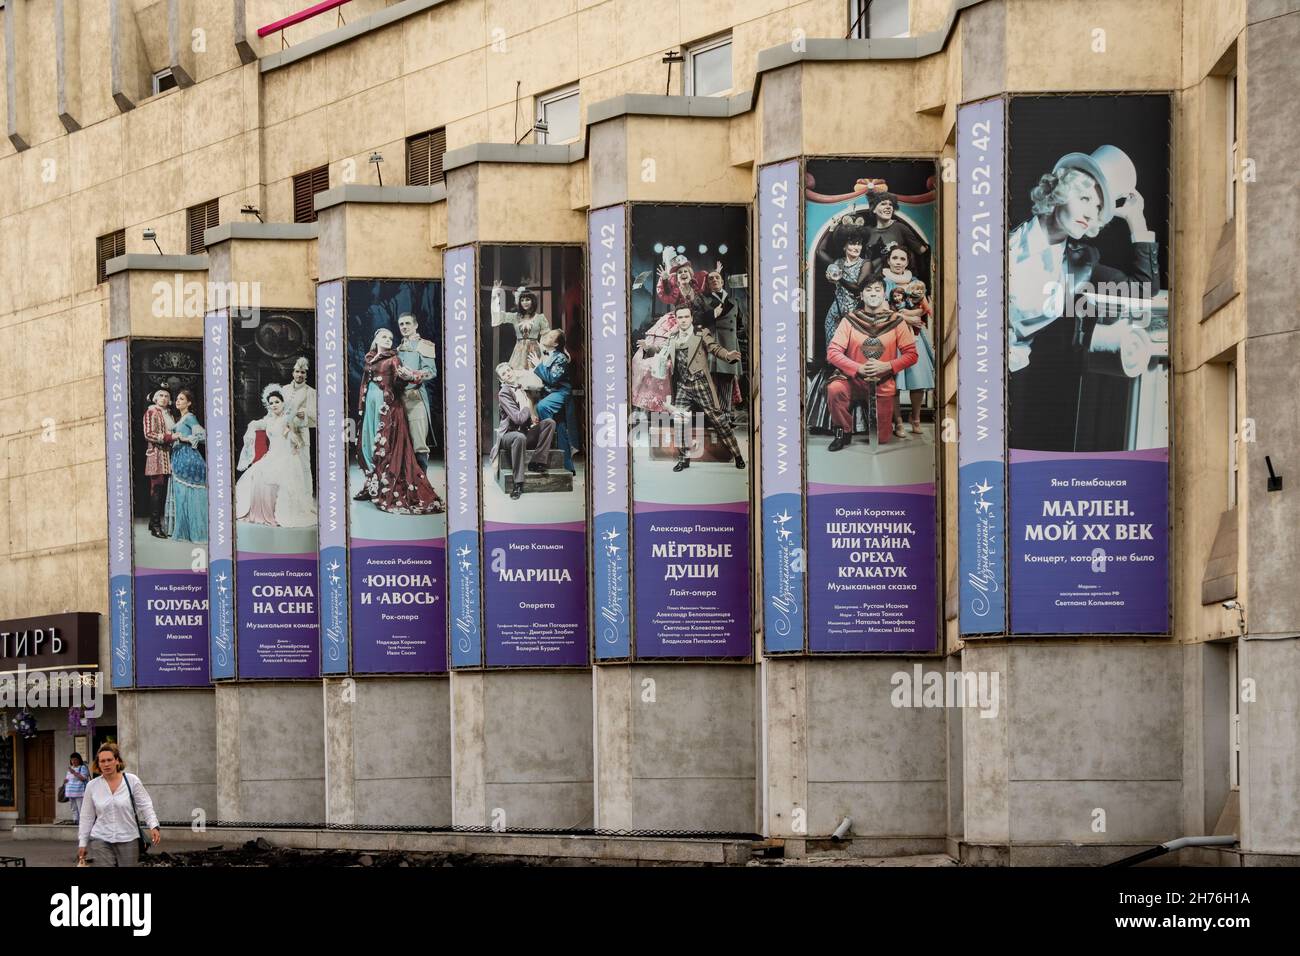 Theatrical posters with advertisements for performances in Russian hang on the facade of the Musical Theater building (built in 1936). Stock Photo